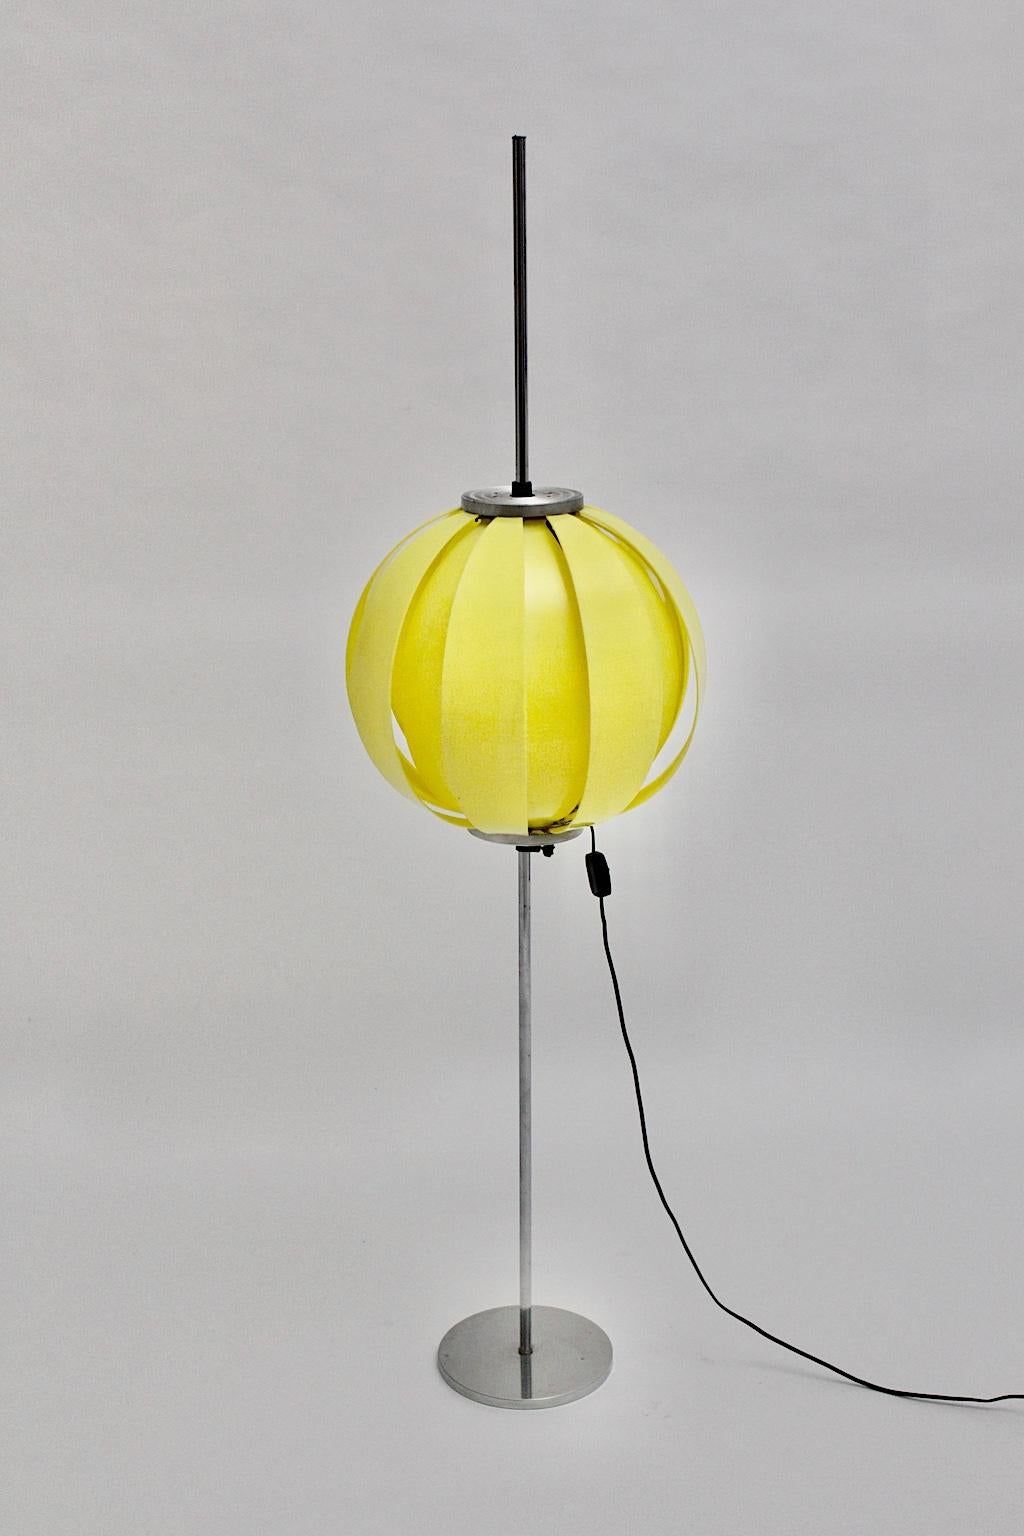 Pop Art vintage plastic ball floor lamp, which was designed, 1960s.
The very decorative plastic ball features 16 yellow plastic parts lamella like and the stem was made of chrome and aluminum.
One E 27 socket and an on/off switch
The floor lamp is